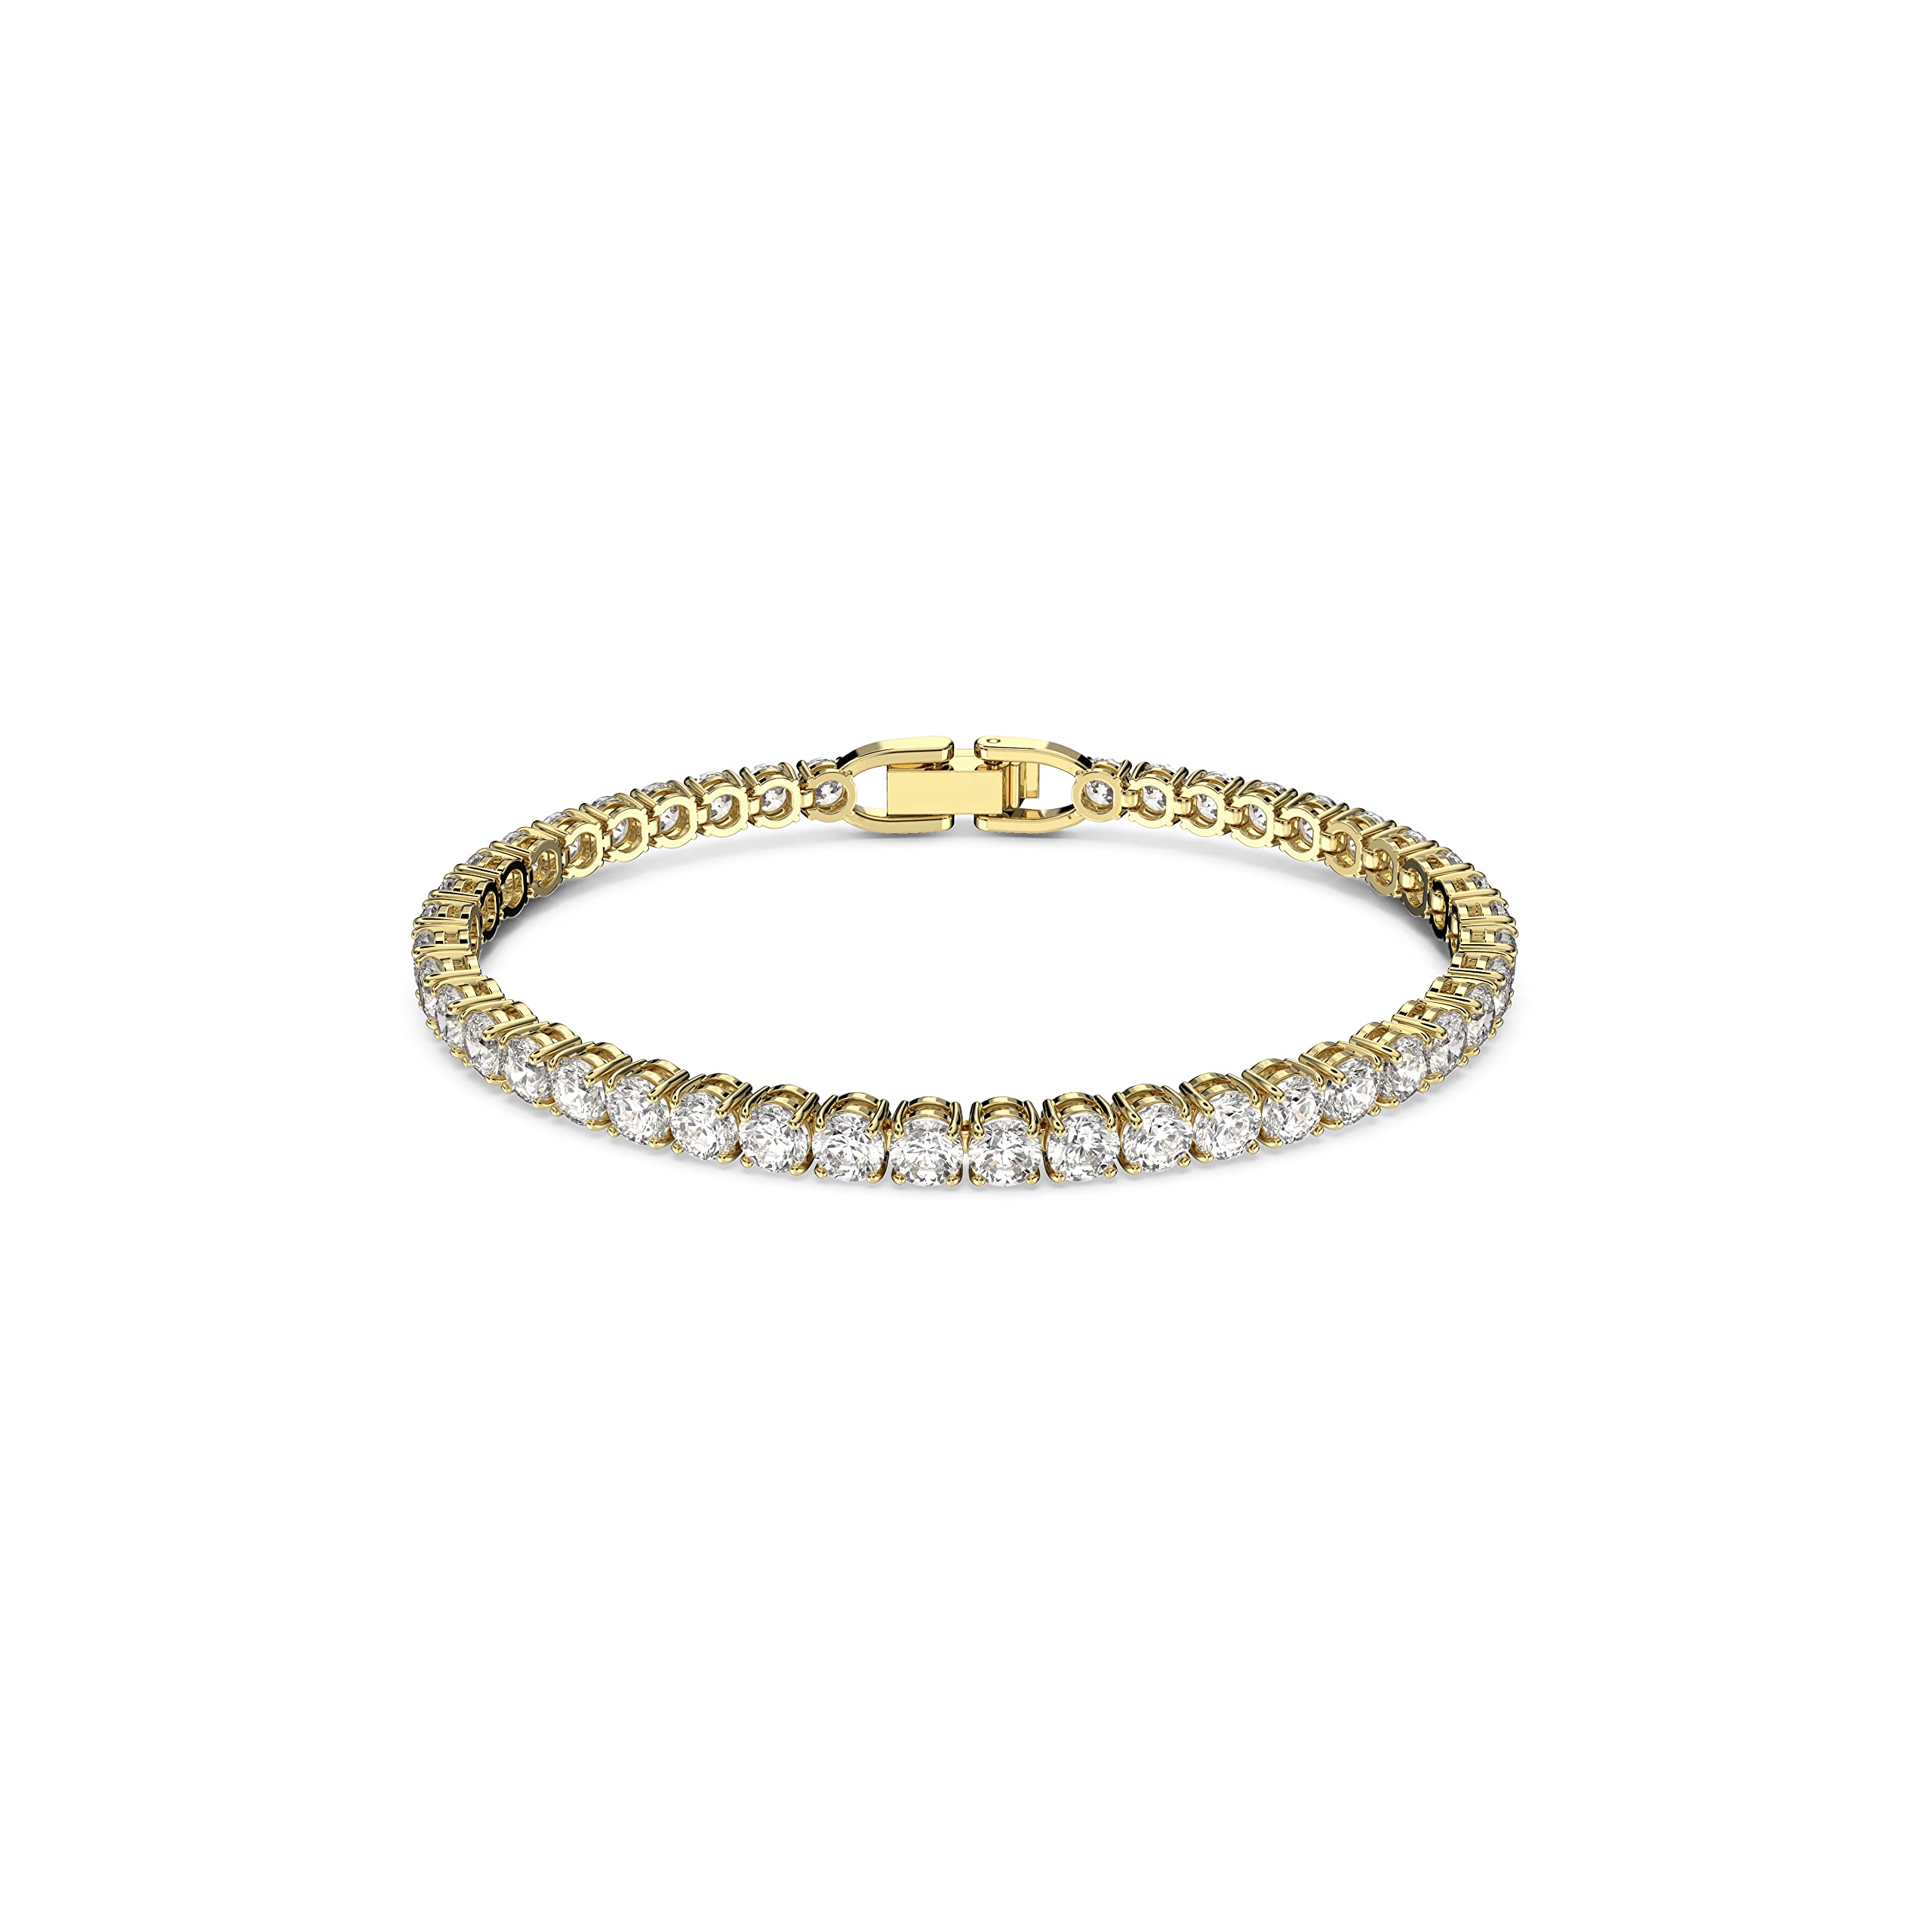 Swarovski Tennis Deluxe collection Womens Bracelet, White crystals with gold Tone-Plated Band